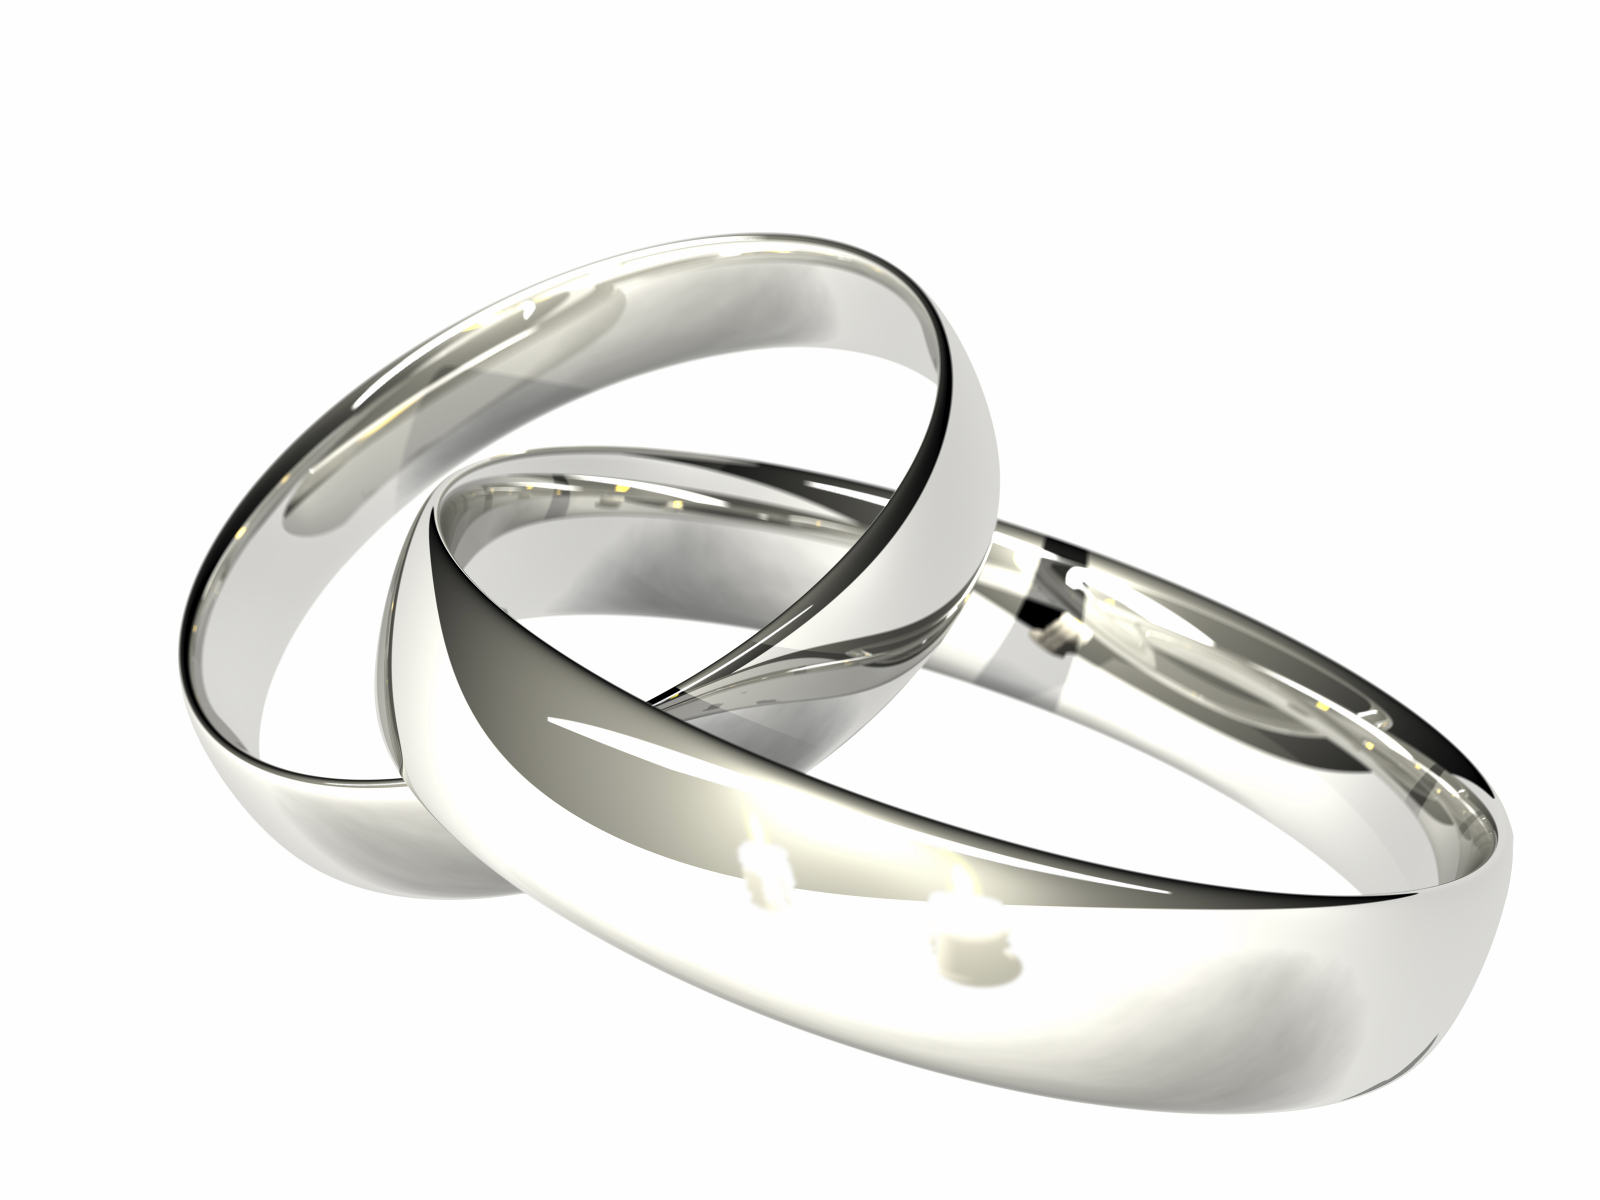 Computer rendered. Two linked rings in platinum or silver. Two candles reflected. Shallow depth of field.